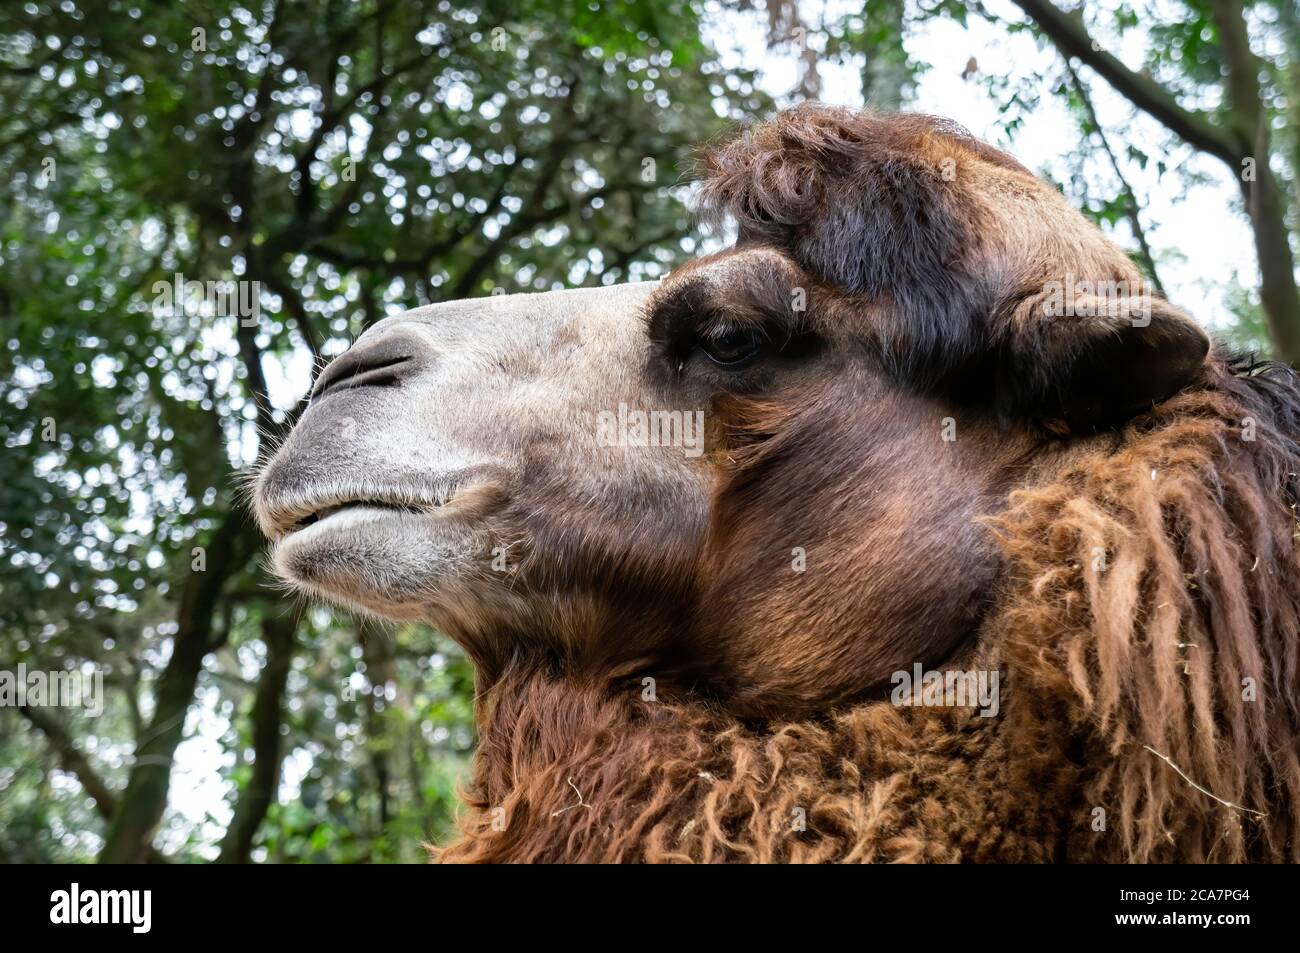 A Bactrian Camel (Camelus bactrianus - a large, even-toed ungulate native to the steppes of Central Asia and largest living camel) in Zoo Safari park. Stock Photo